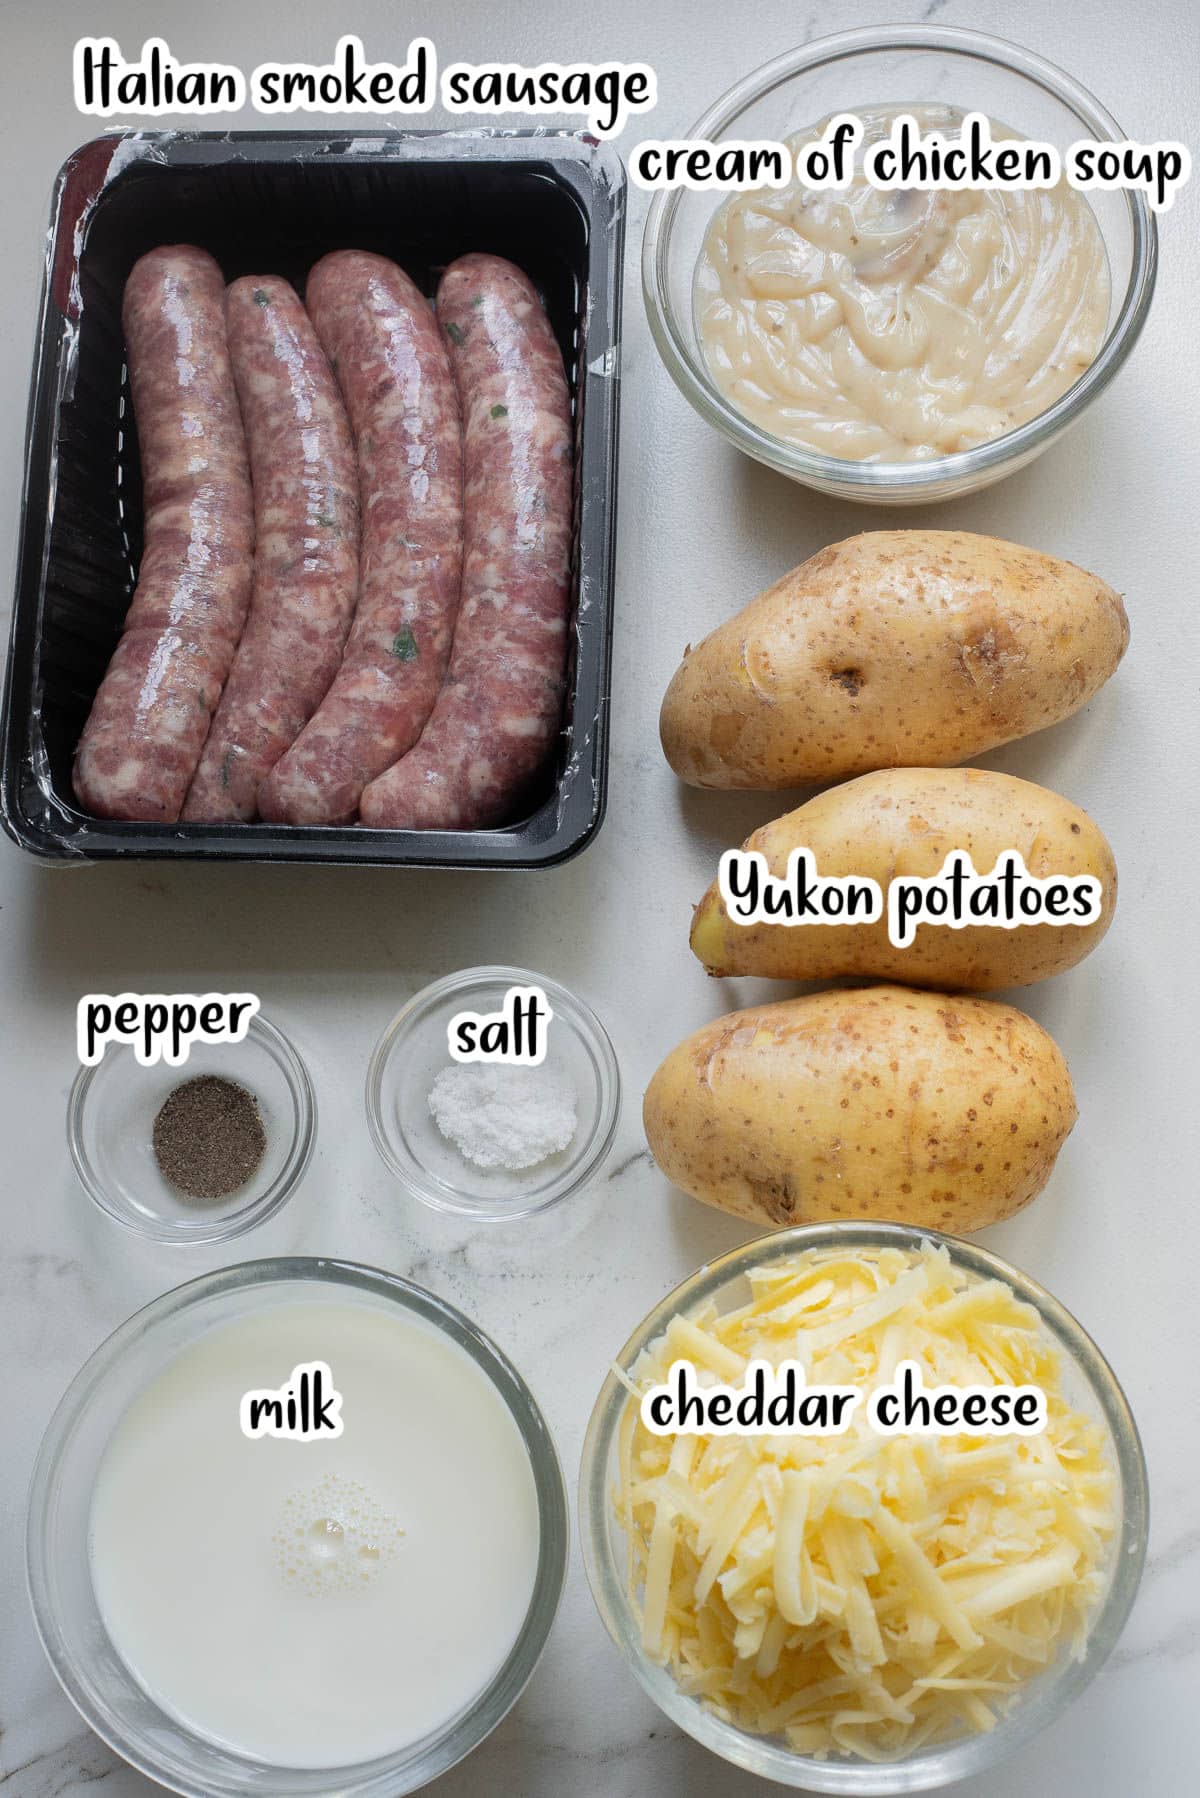 Sausages, soup, potatoes, salt, pepper, cheese, and milk on a marble counter.